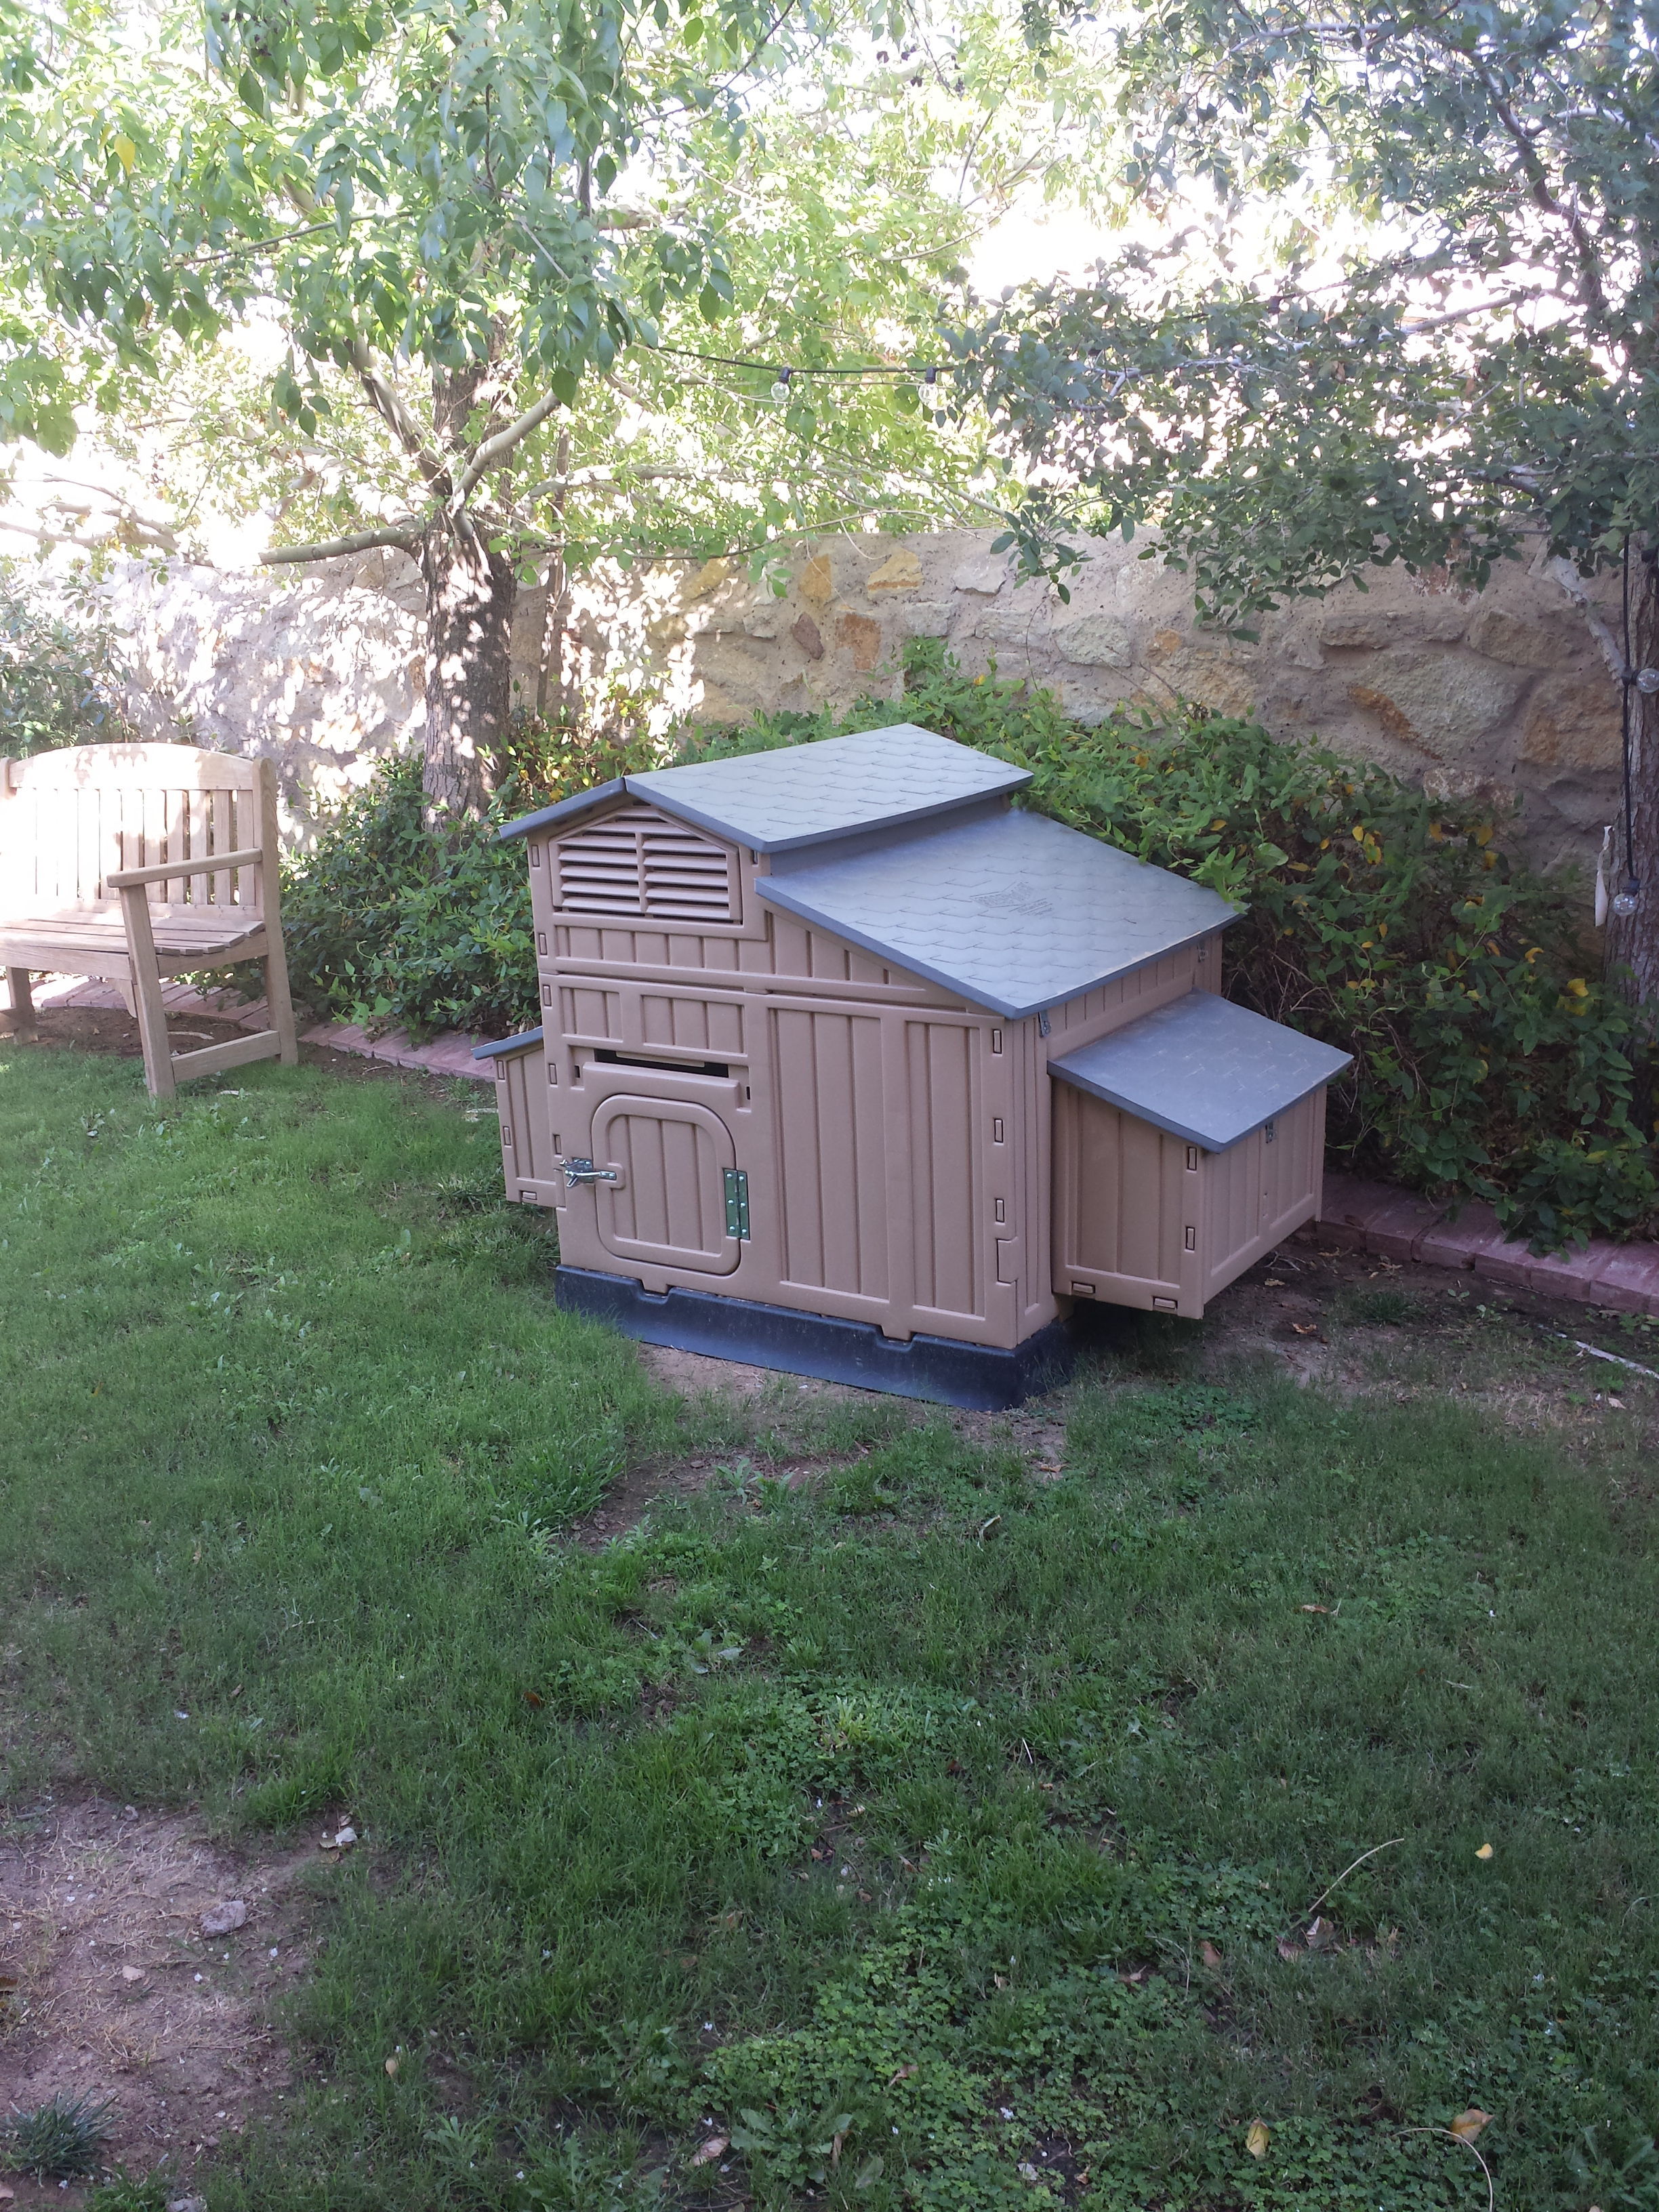 in the back yard we have a coop for the chicks when they free range